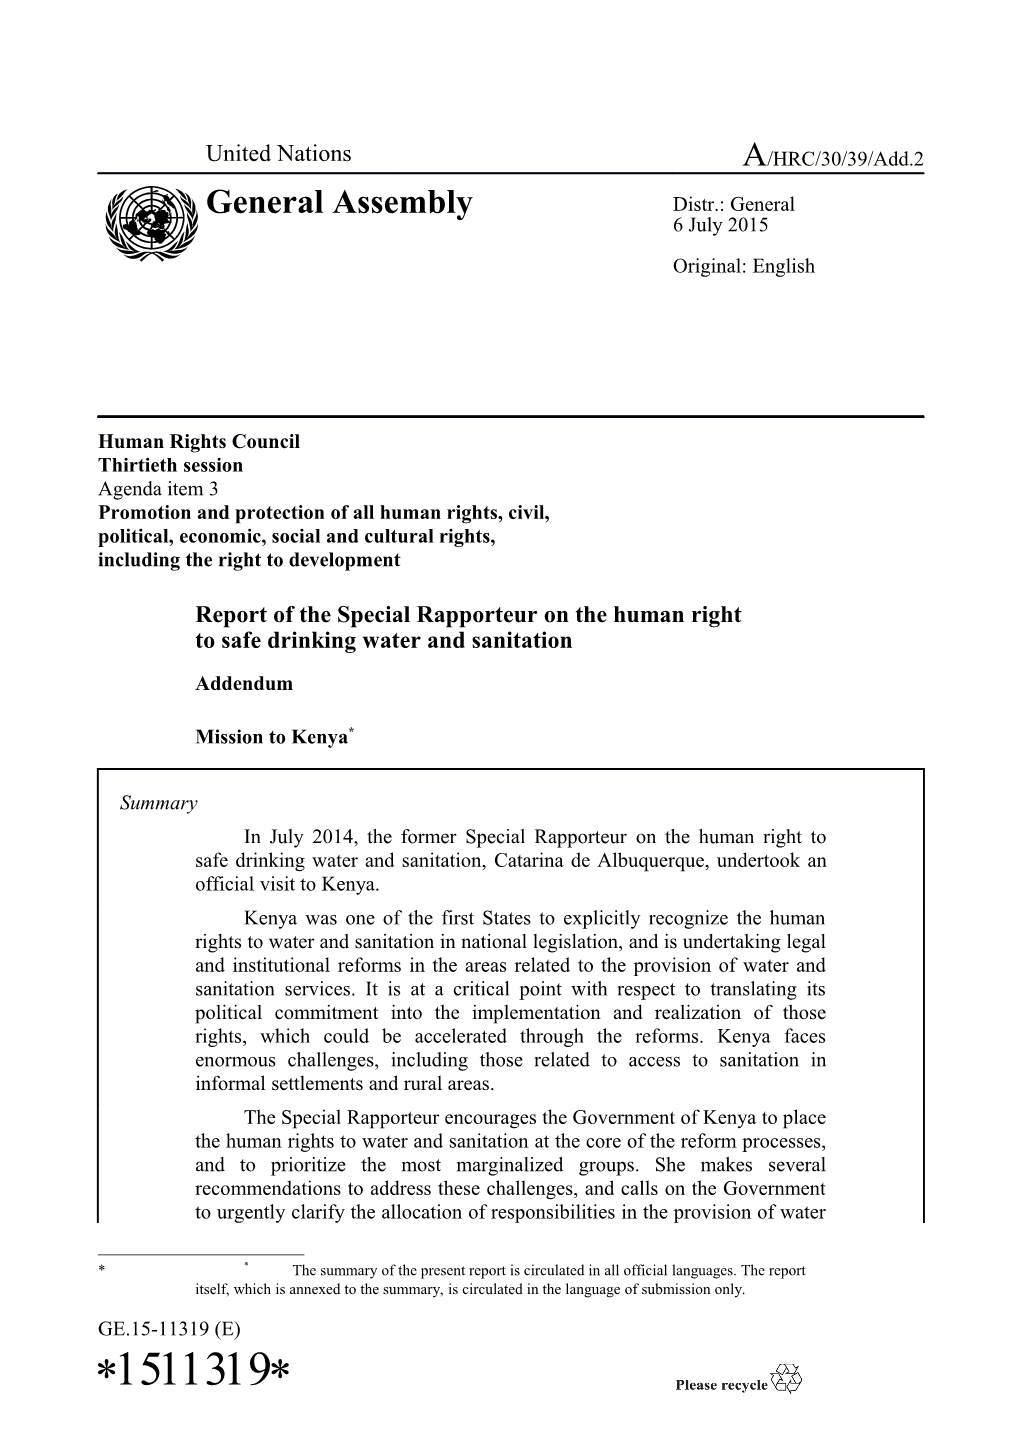 Report of the Special Rapporteur on the Human Right to Safe Drinking Water and Sanitation